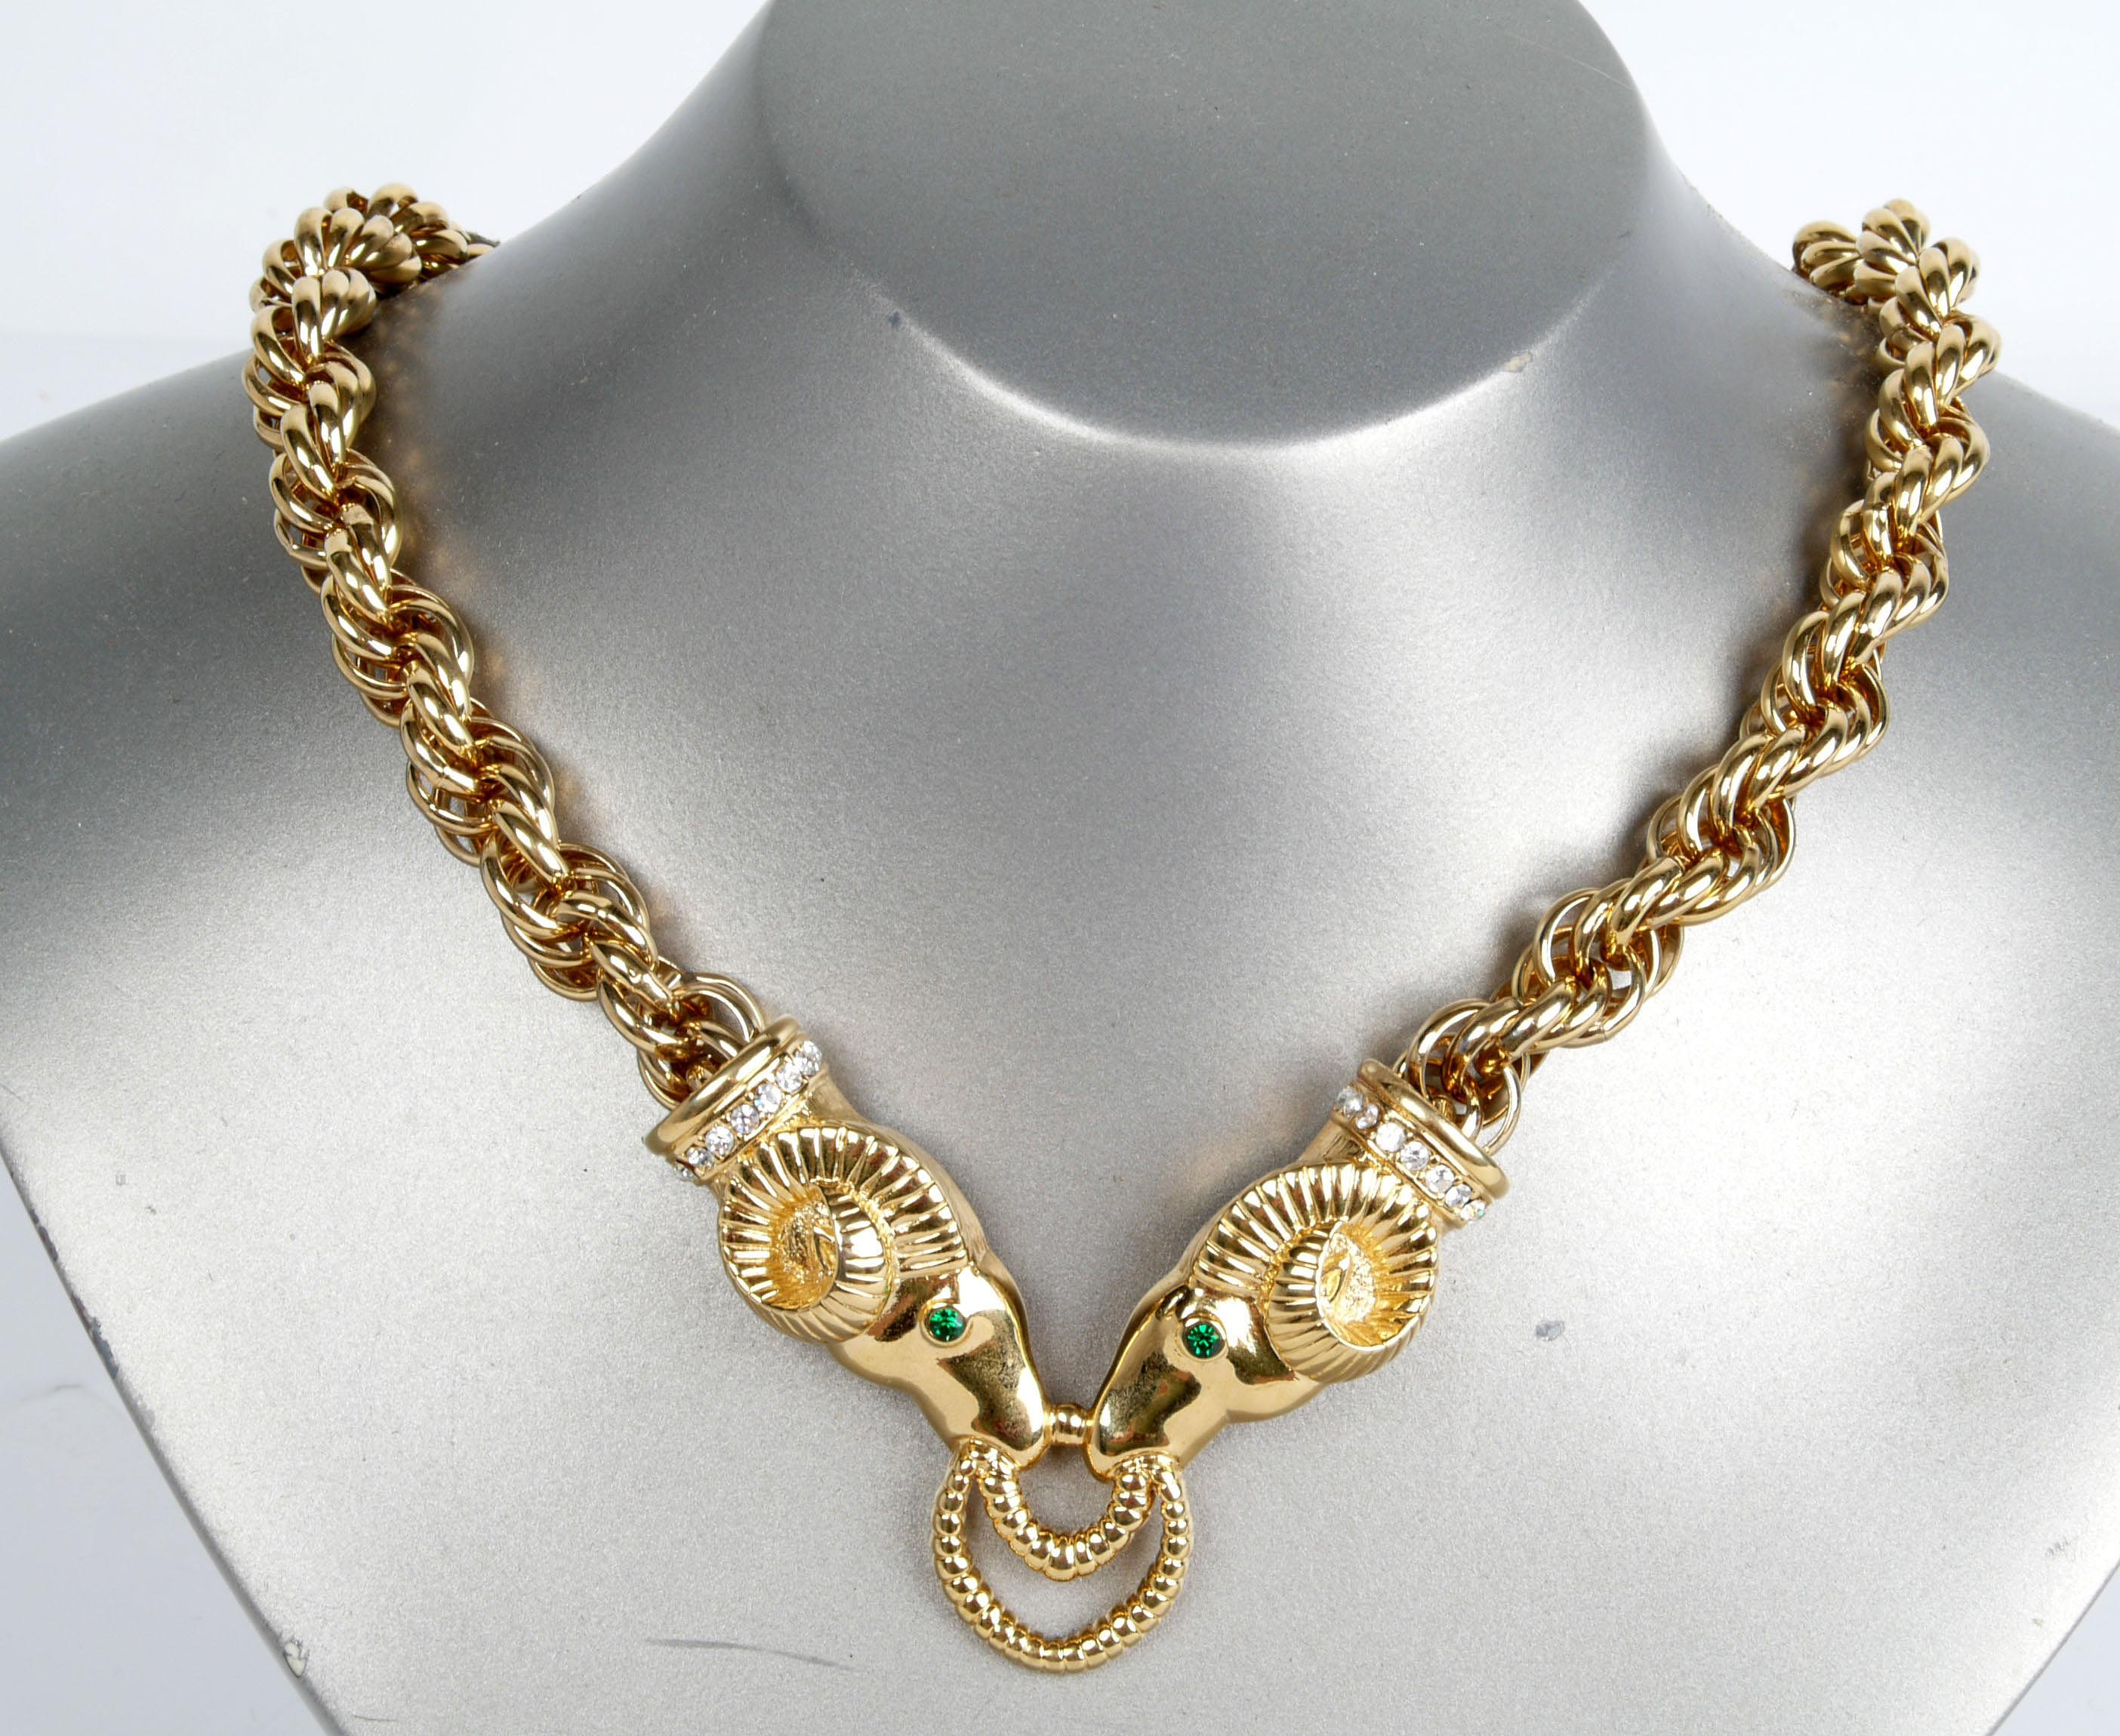 Kenneth Jay Lane gold tone ram's head necklace and clip back earrings adorned with rhinestones. 
Maker's mark on all pieces, 